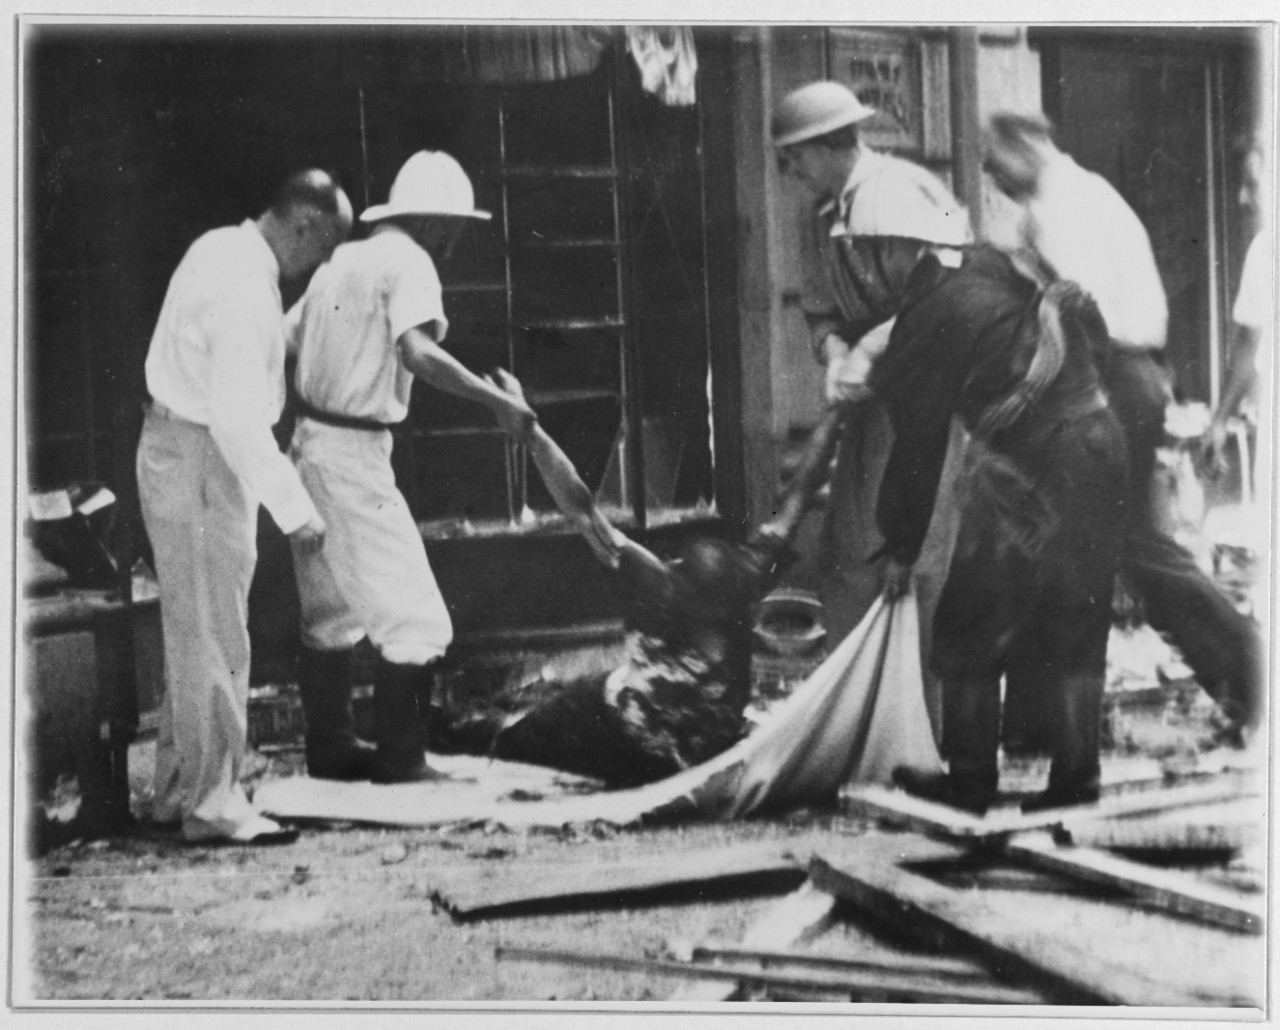 Devastation after accidental bombing, in the International Settlement, Shanghai, China. 